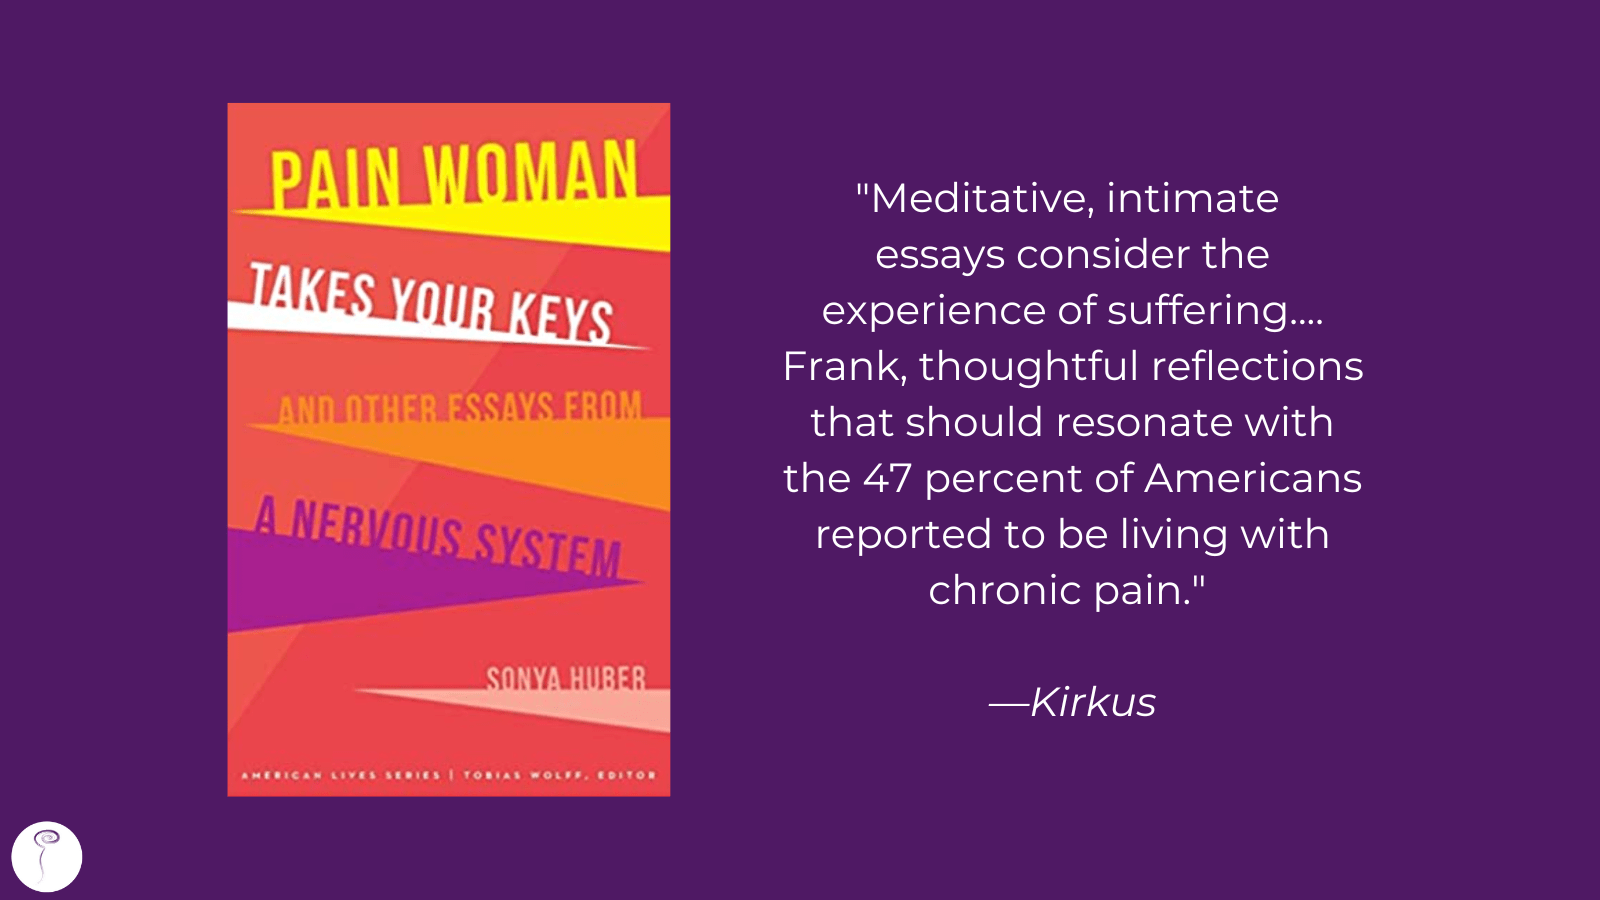 A graphic showing the cover of the book "Pain Woman Takes Your Keys" and a quote from a reviewer